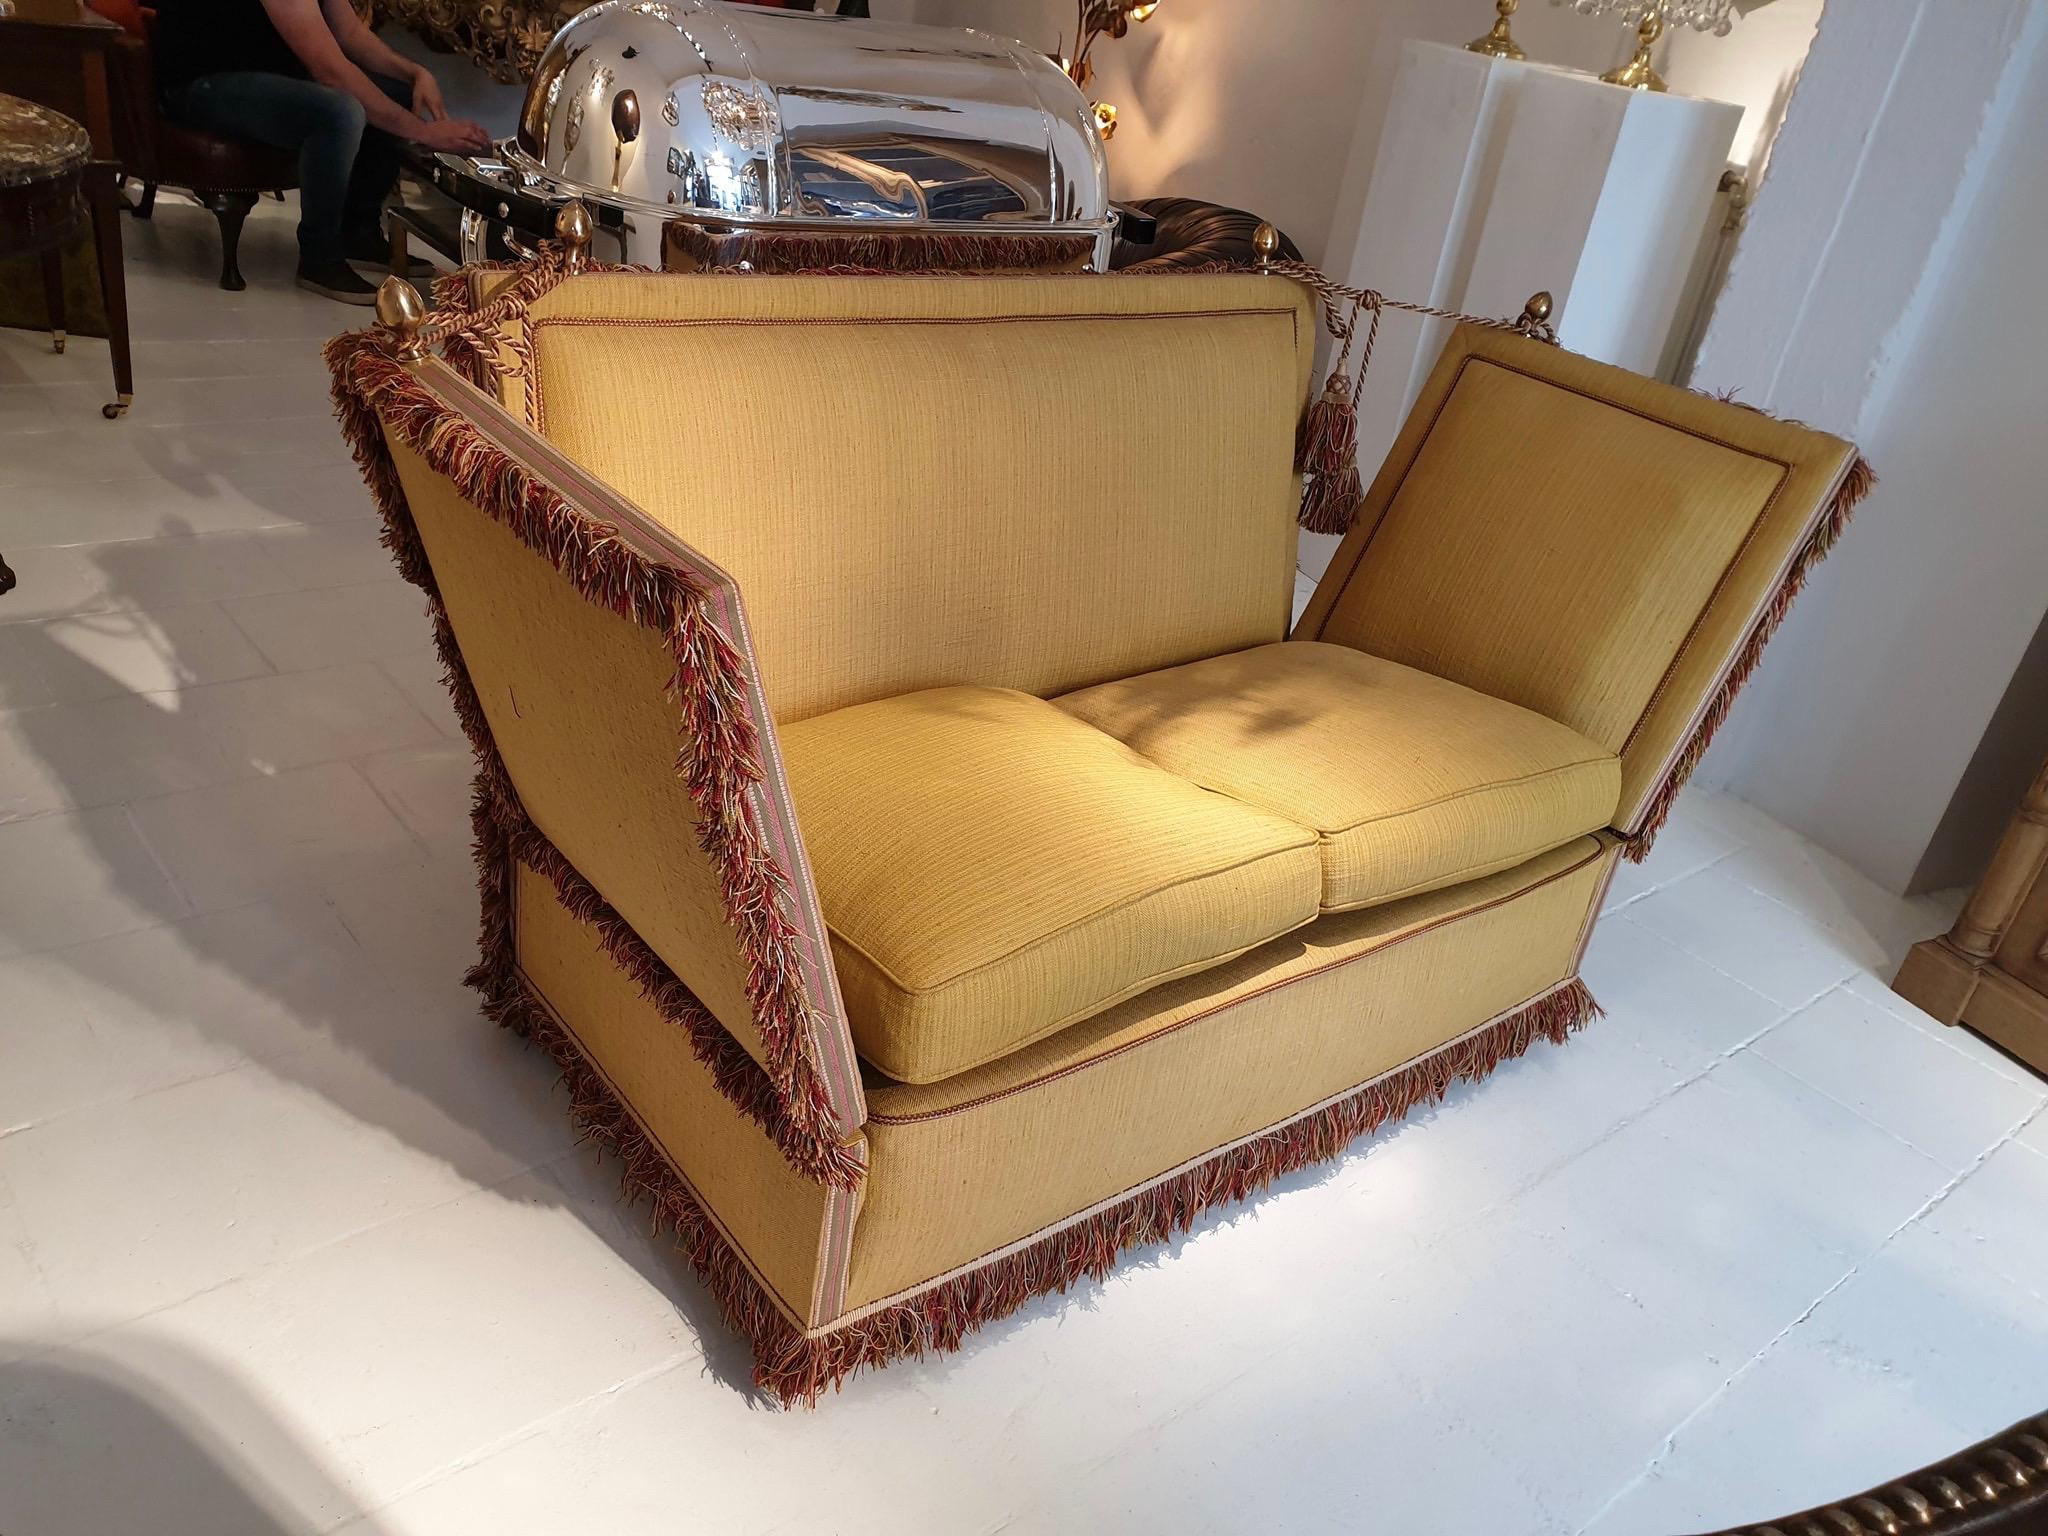 Very glamorous Classic Knole style sofa upholstered in a beautiful soft shade of goldish yellow fabric.
The Knole sofa or settee originated in England in the late 1700s and is still being produced to this day which says something about the Classic